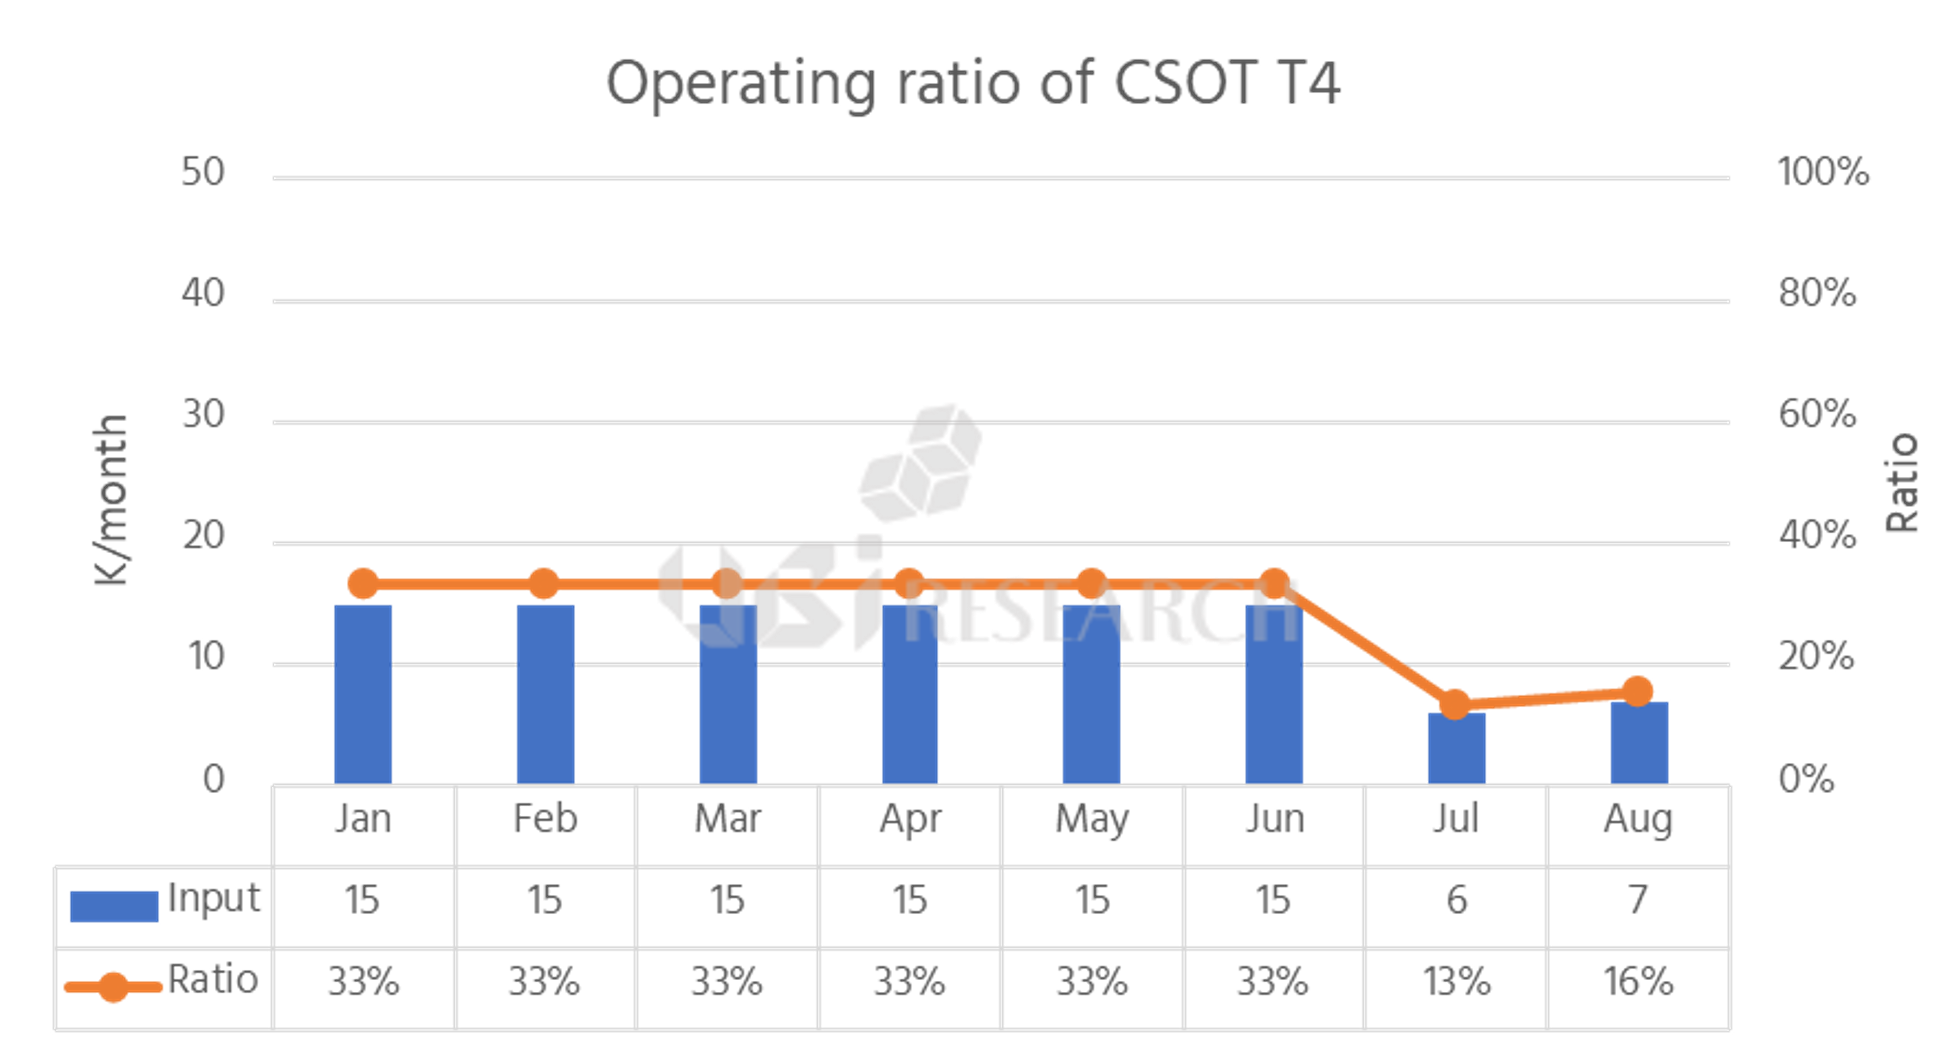 Utilization rate of TCL CSOT T4 line until August 2022, Source: 2022 OLED Display Semi-Annual Report